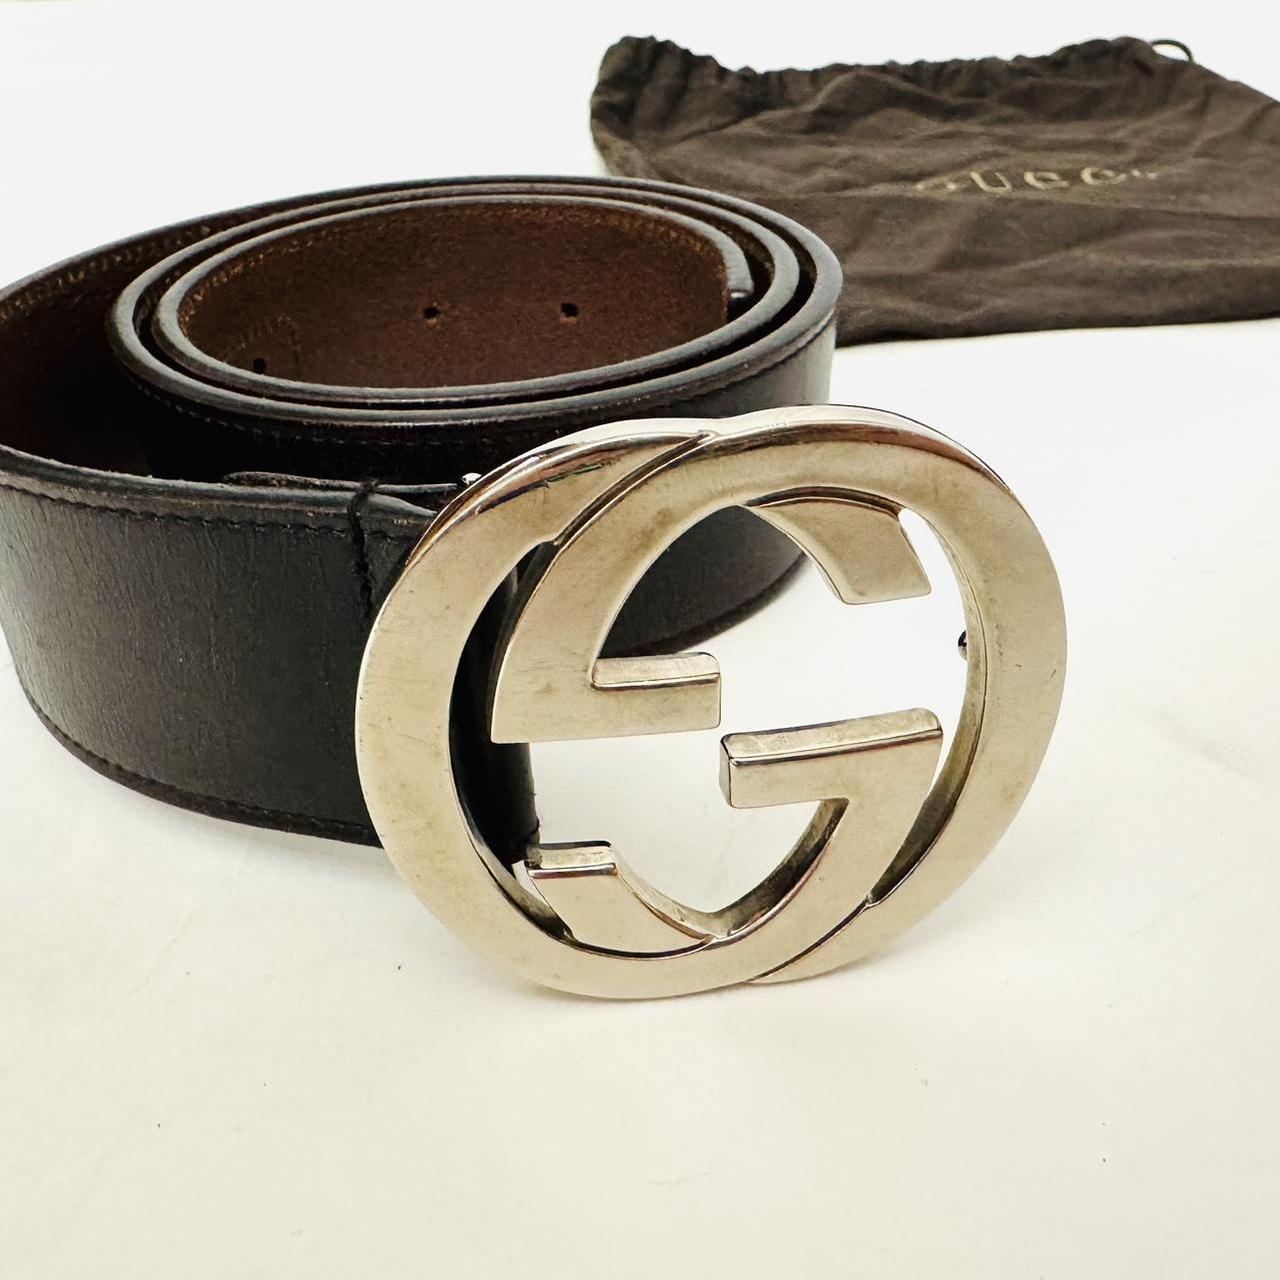 GUCCI • Brown & Silver GG Belt 100% authentic GUCCI... - Depop